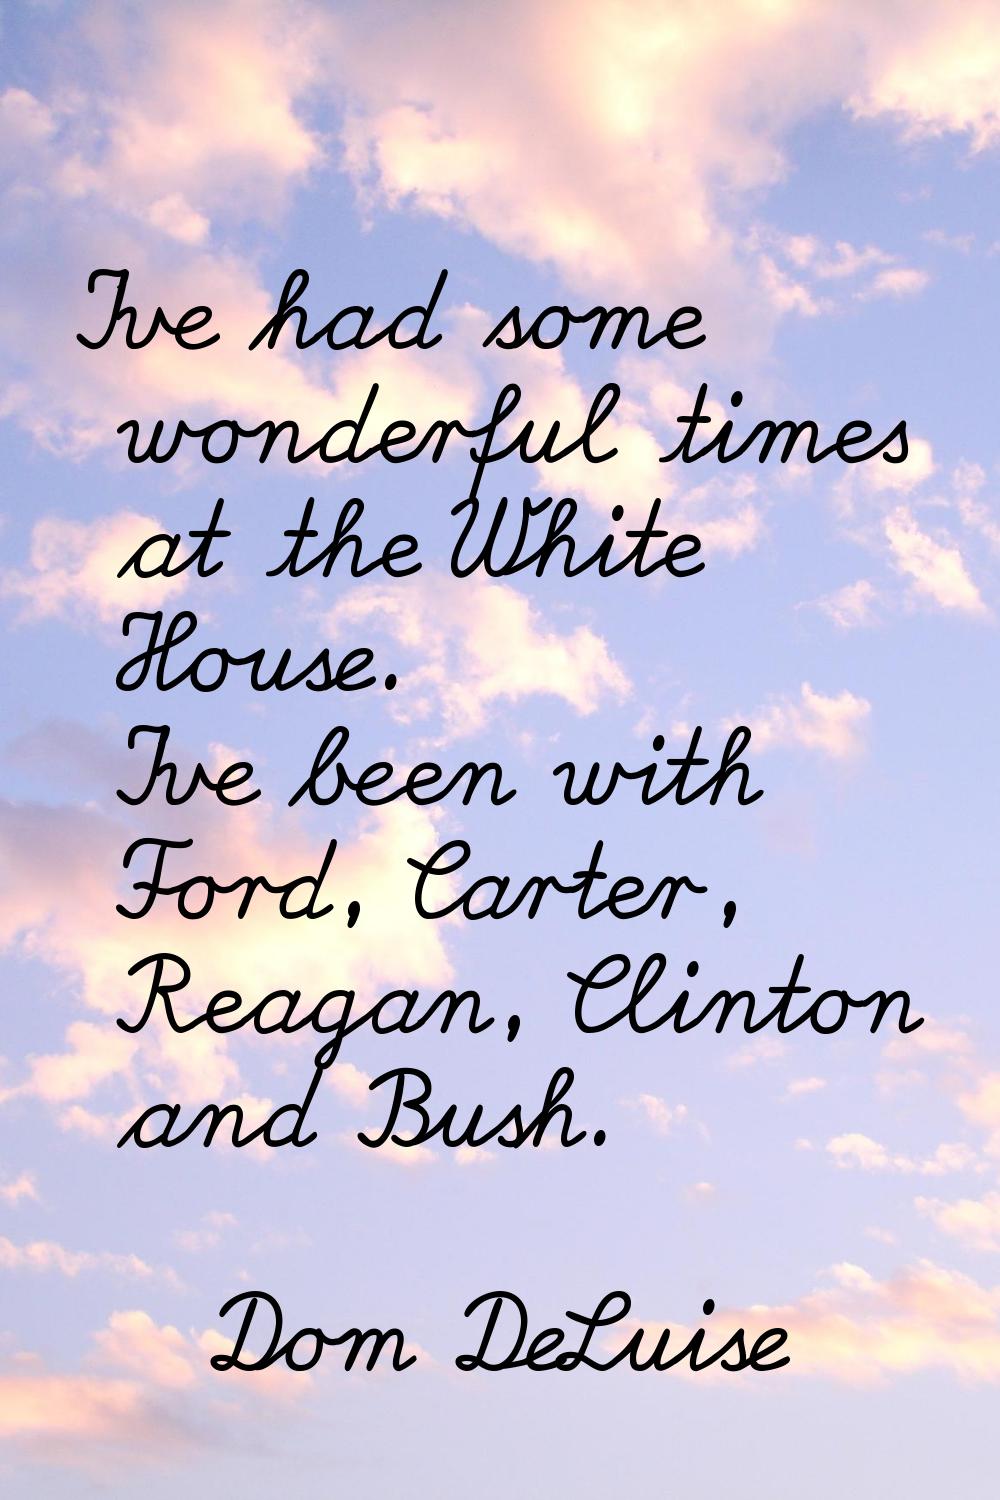 I've had some wonderful times at the White House. I've been with Ford, Carter, Reagan, Clinton and 